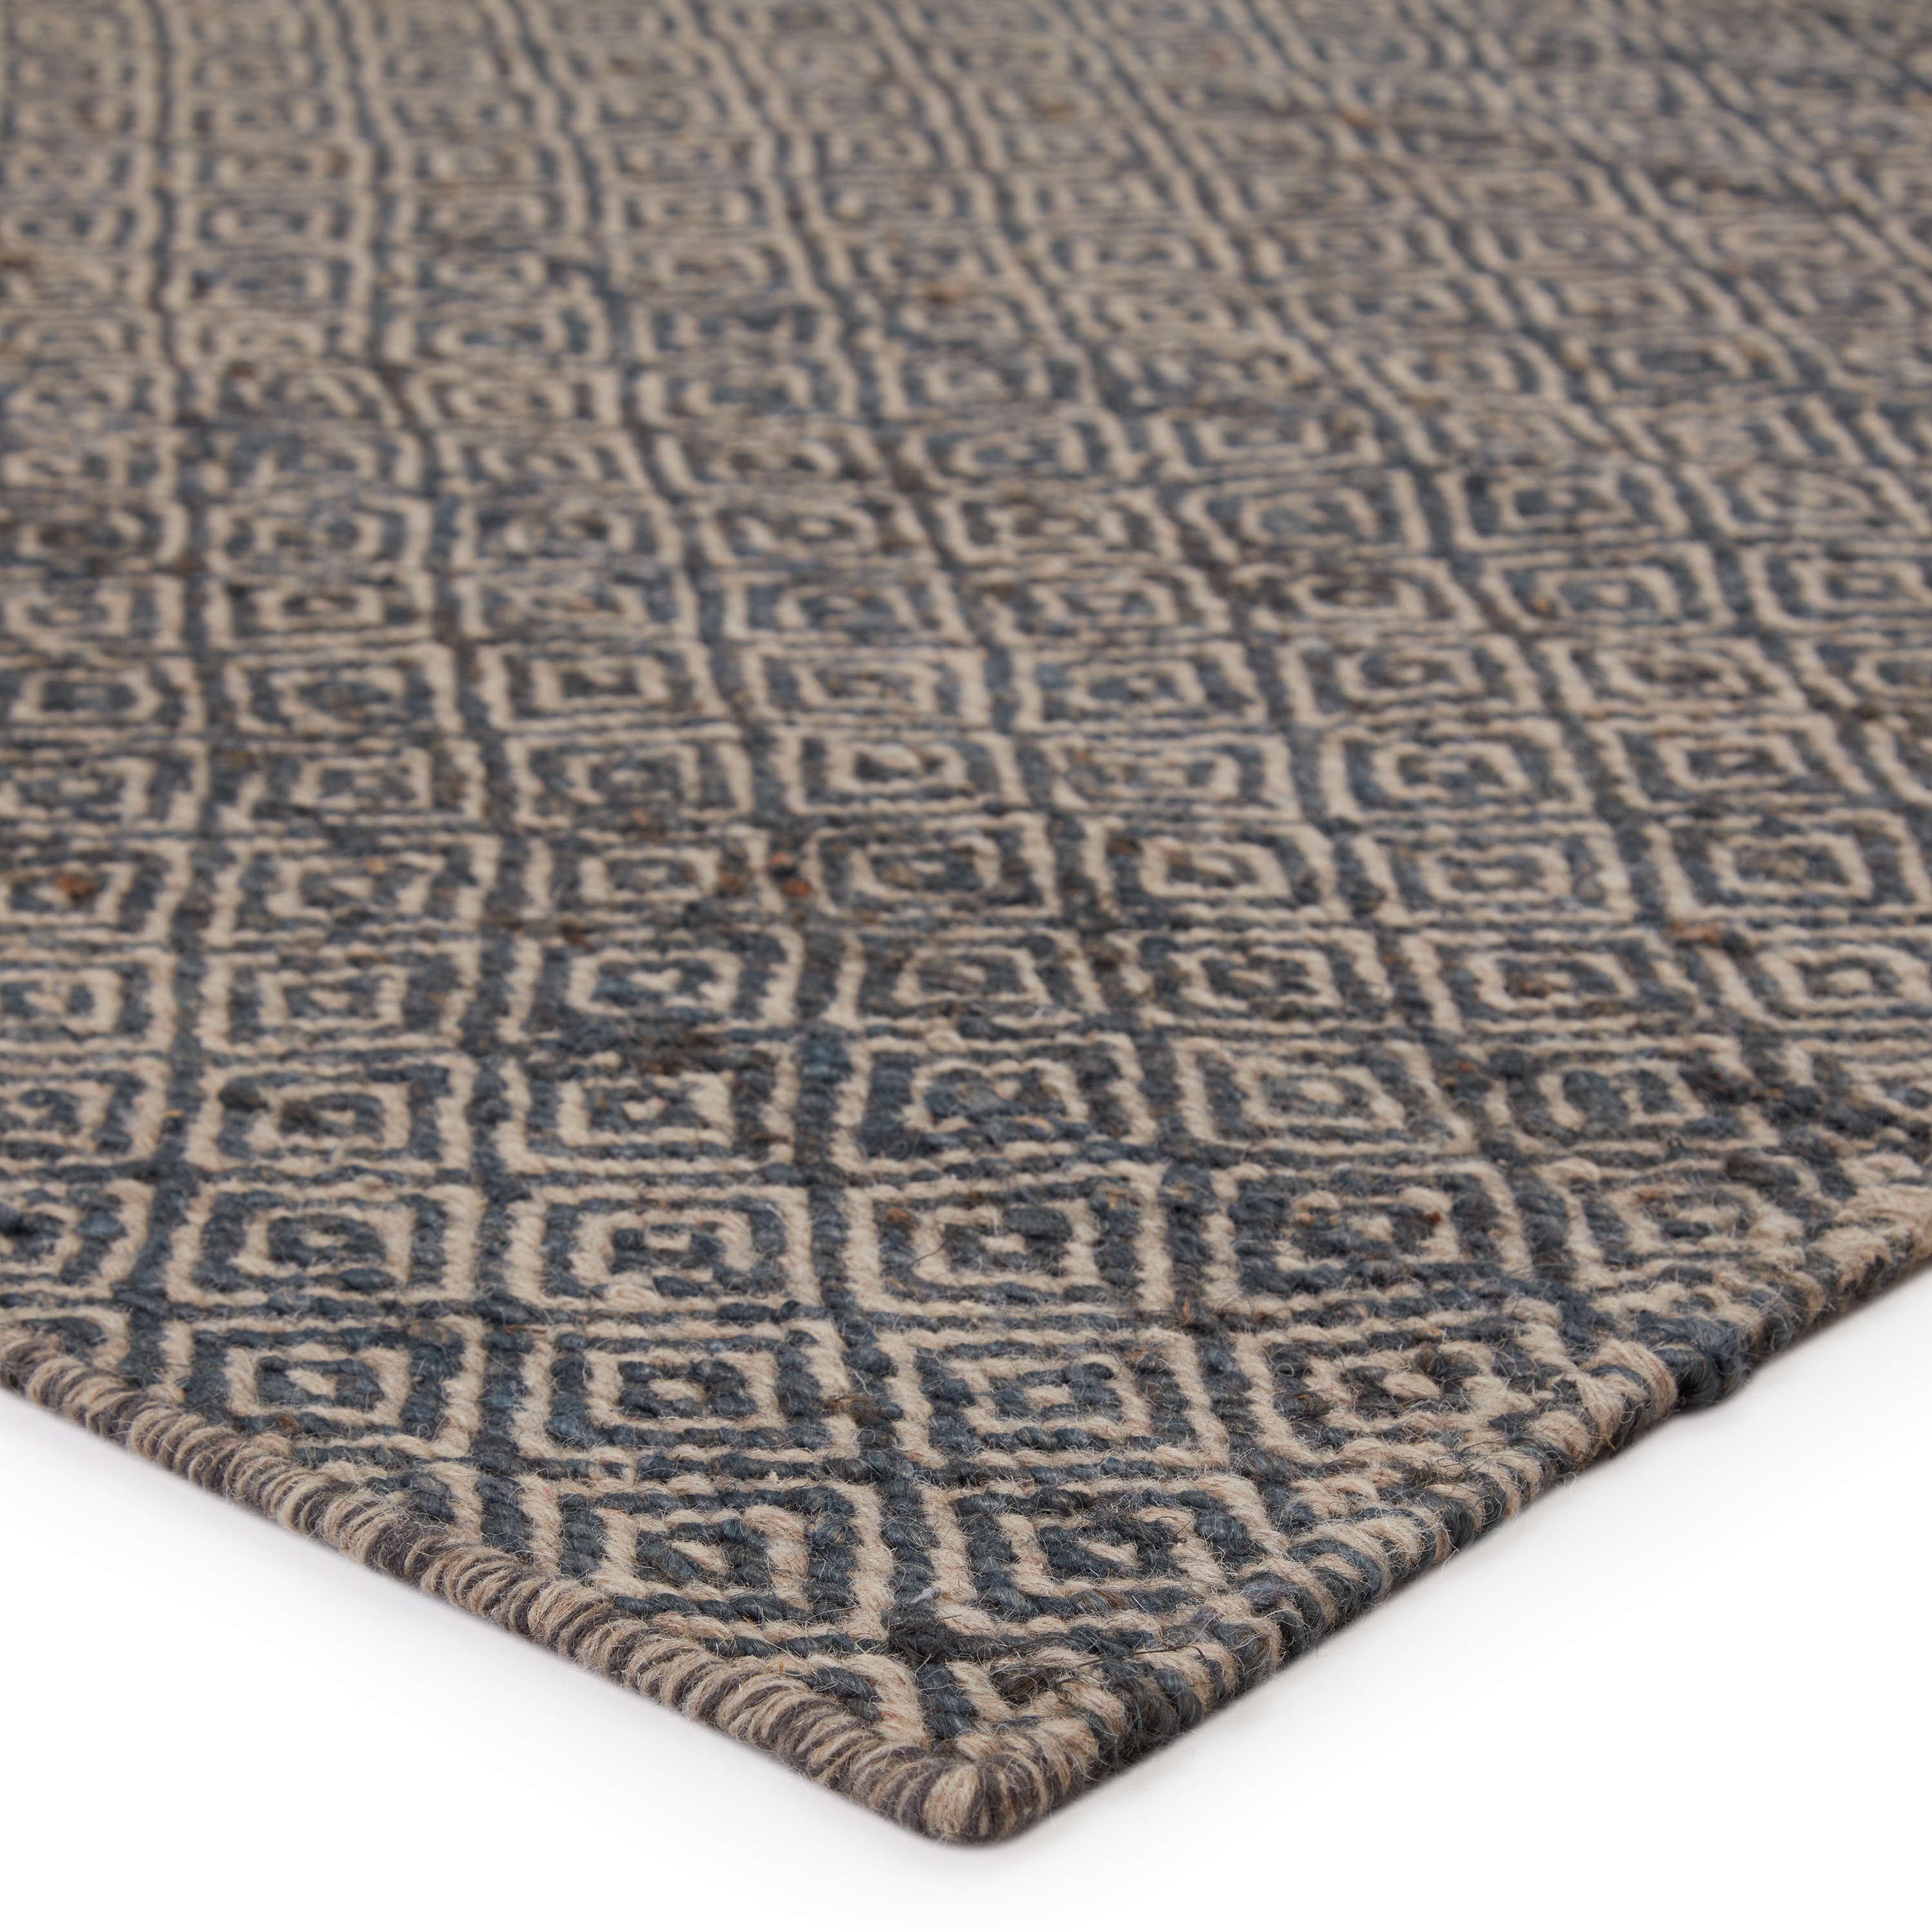 Wales Natural Geometric Gray/ White Area Rug (8' X 10') - Image 1